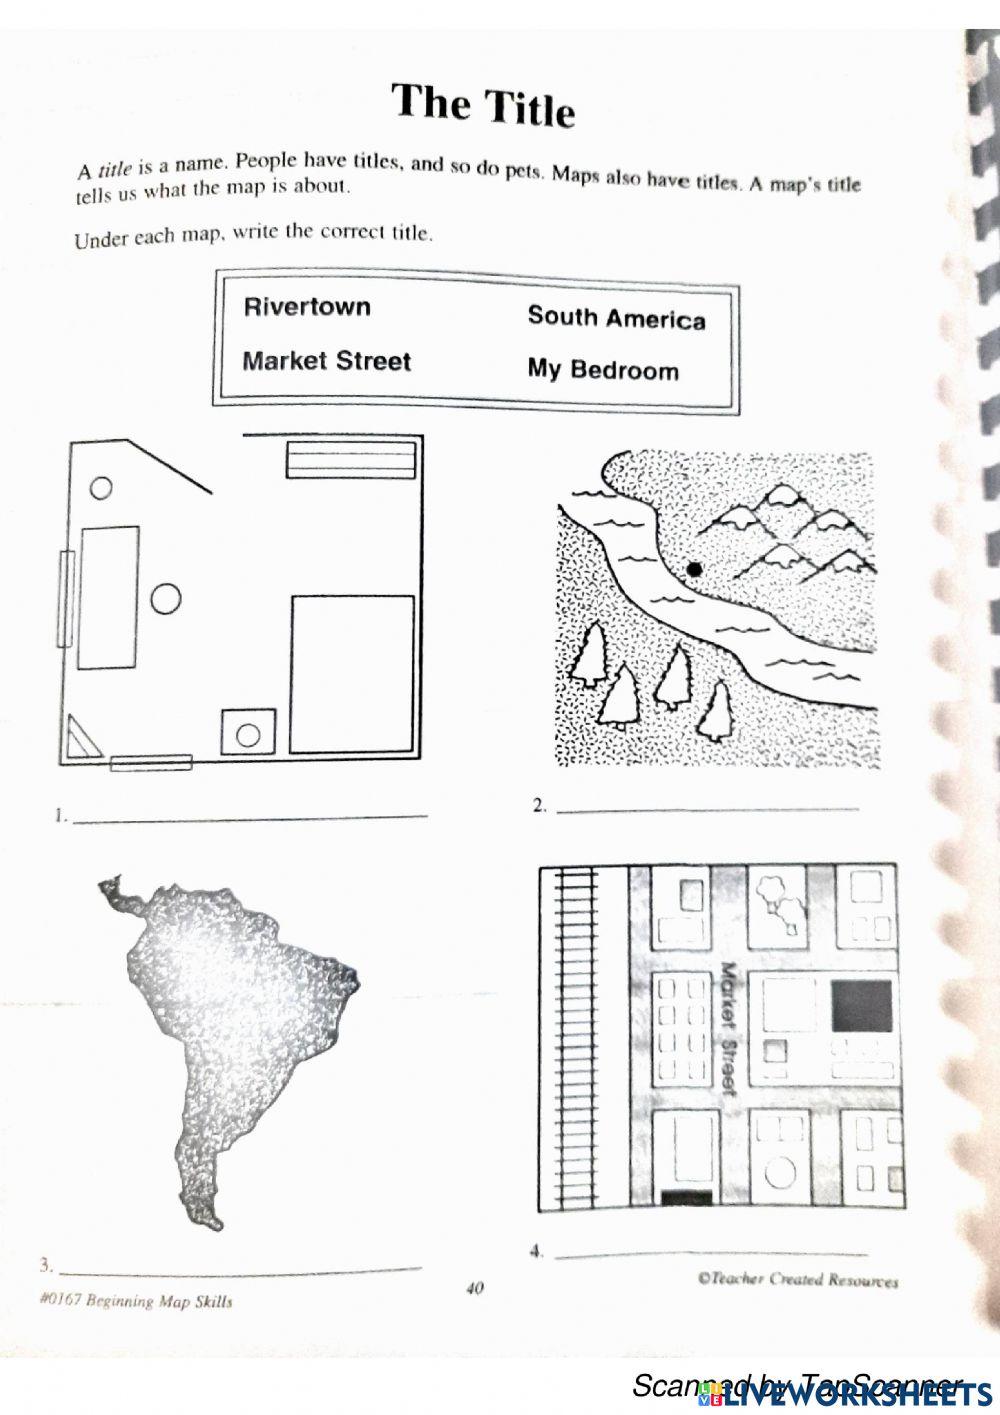 Parts of a Map practice worksheet